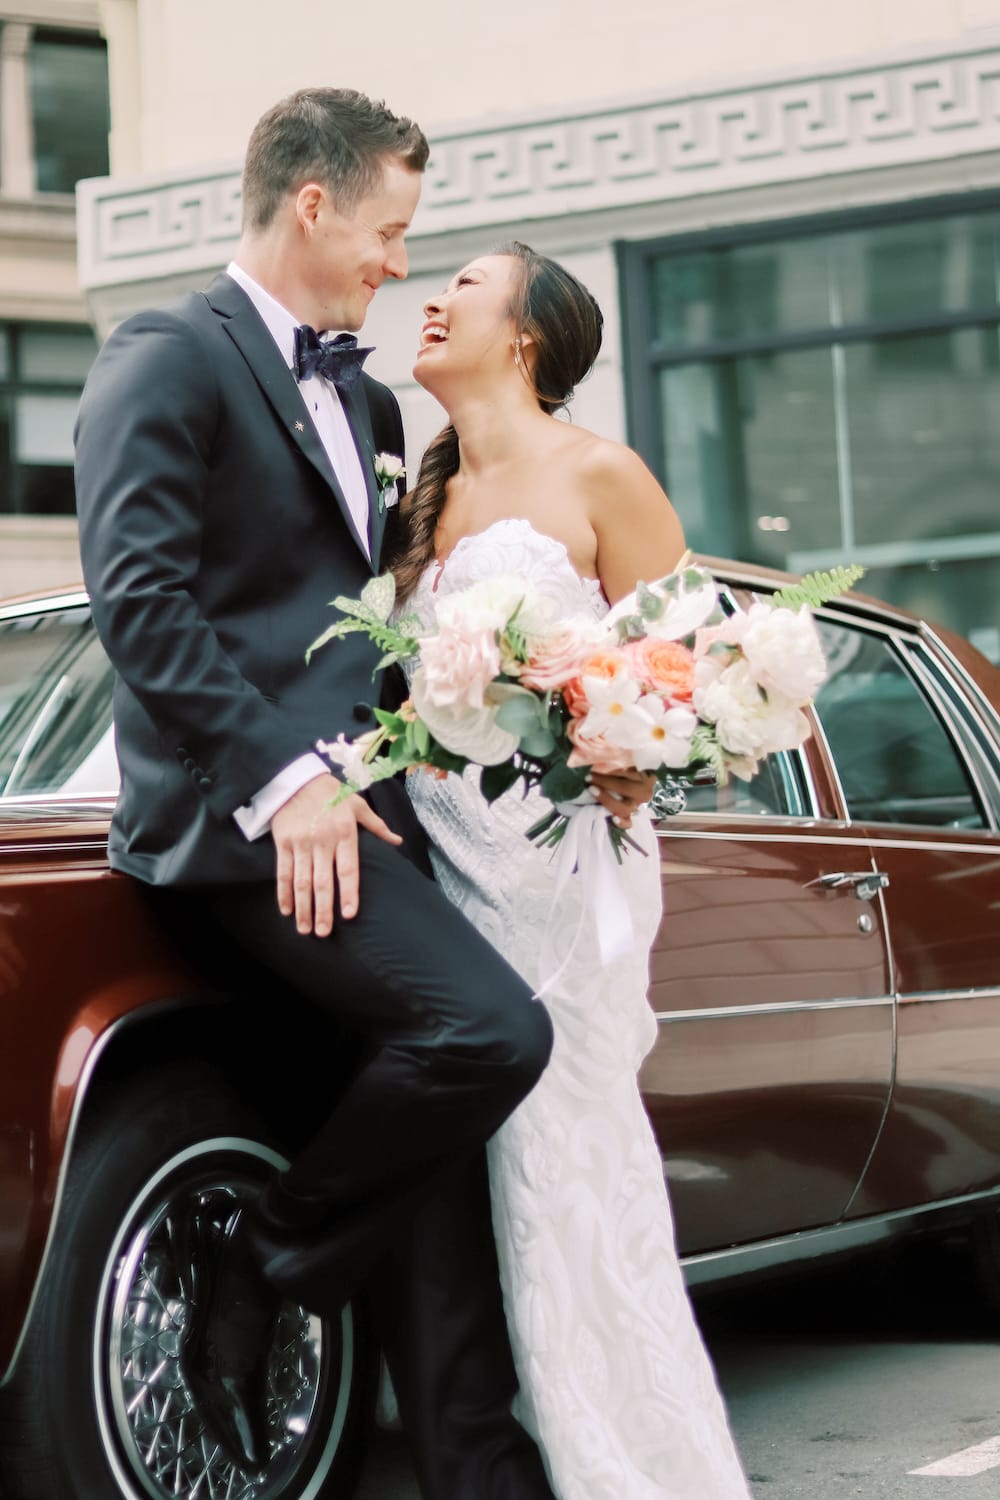 Fairmont Copley Plaza Wedding in Boston. Couple smiling and posing in front of a red vintage car.